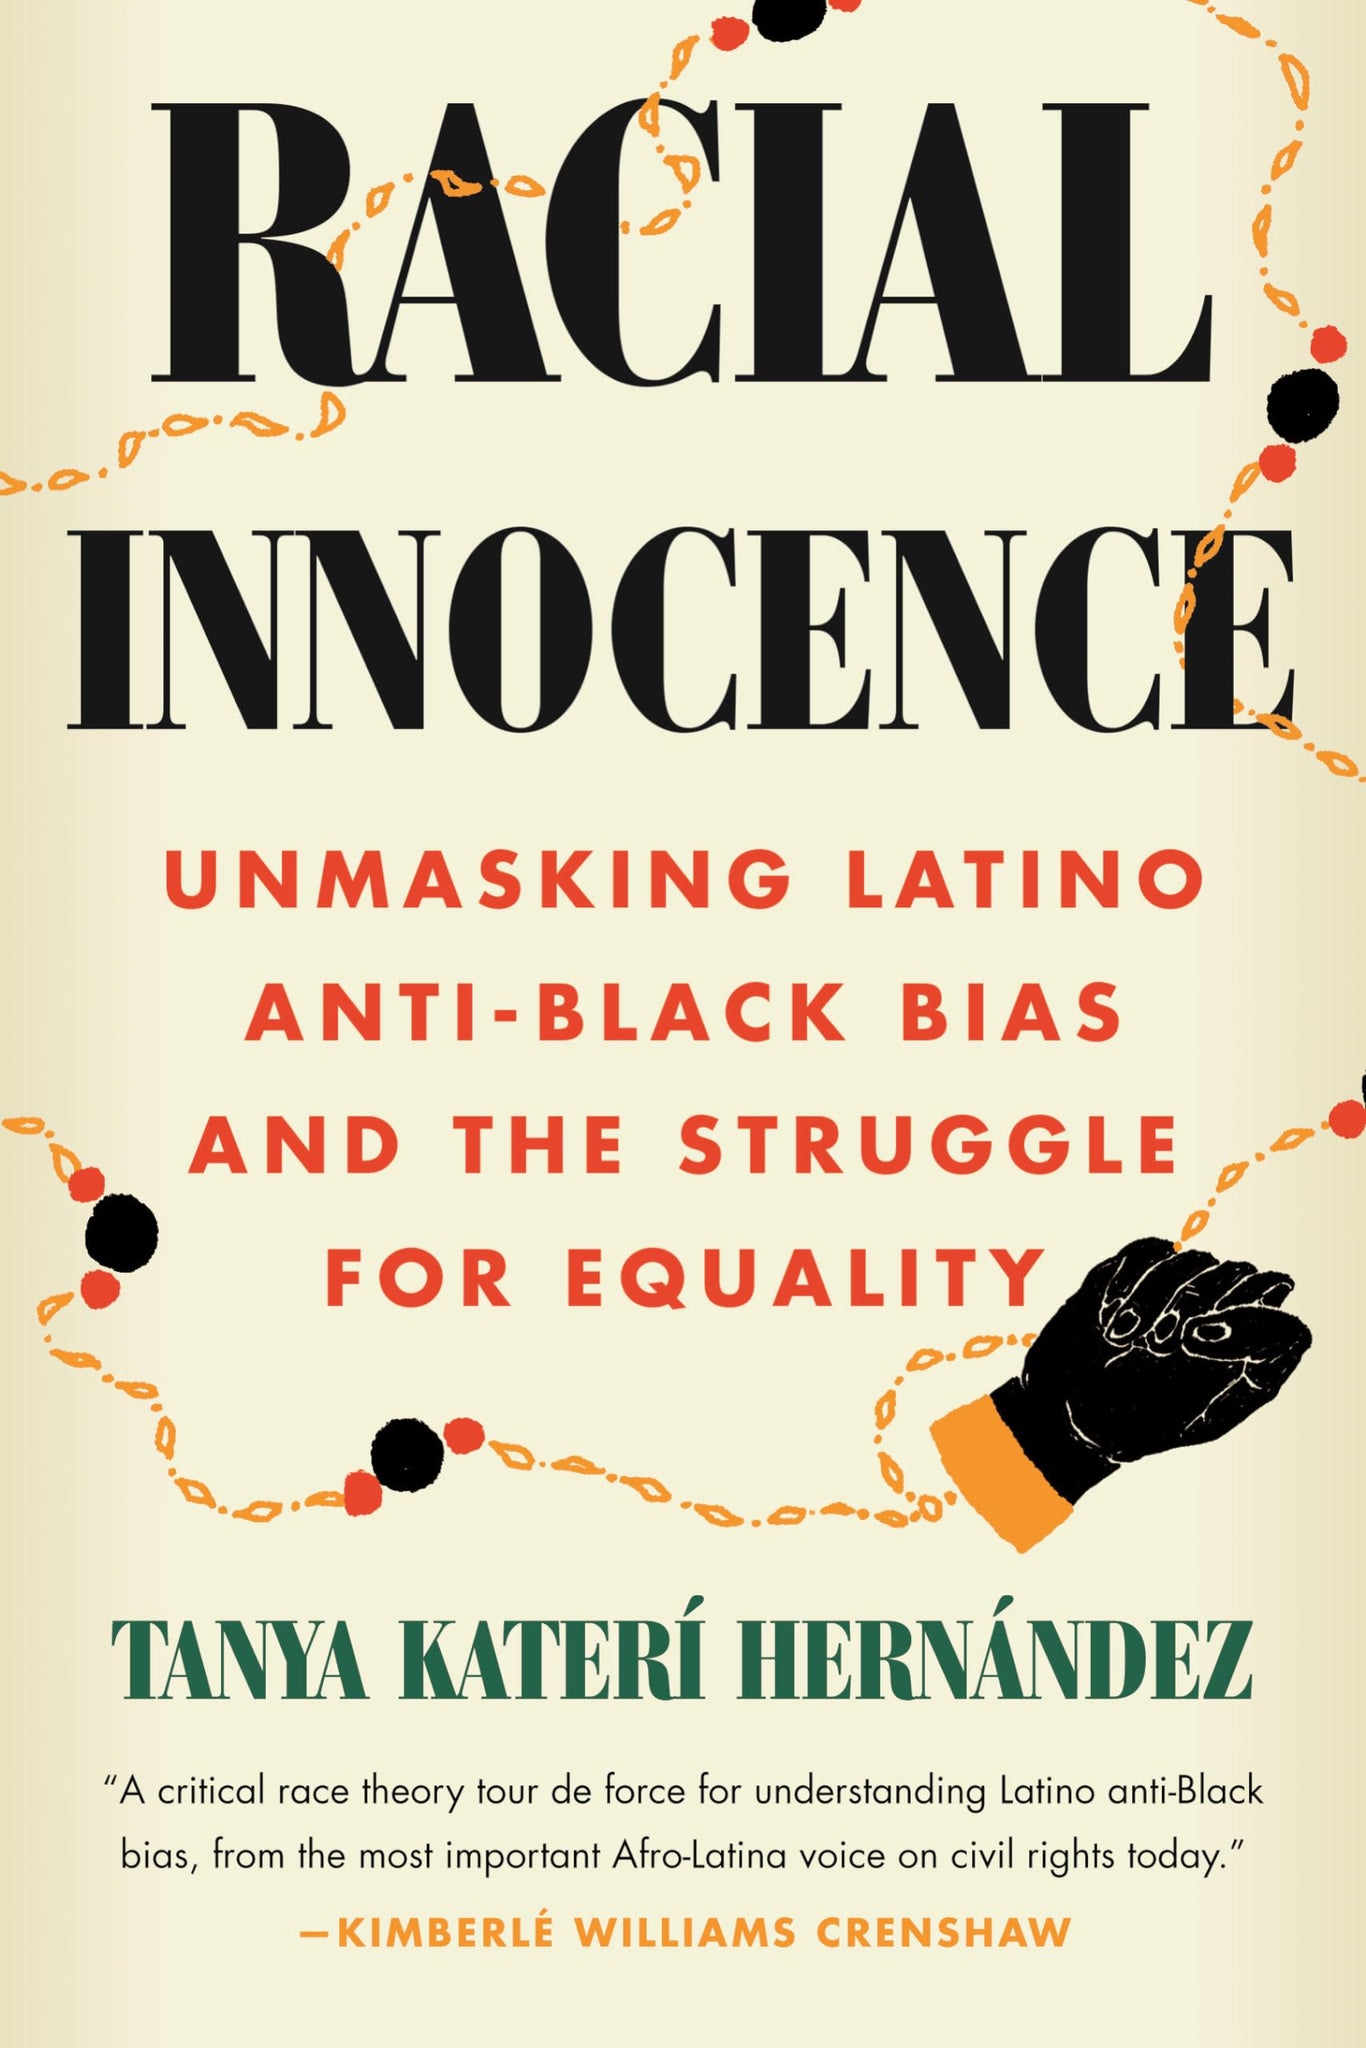 Racial Innocence: Unmasking Latino Anti-Black Bias and the Struggle for Equality (Paperback)